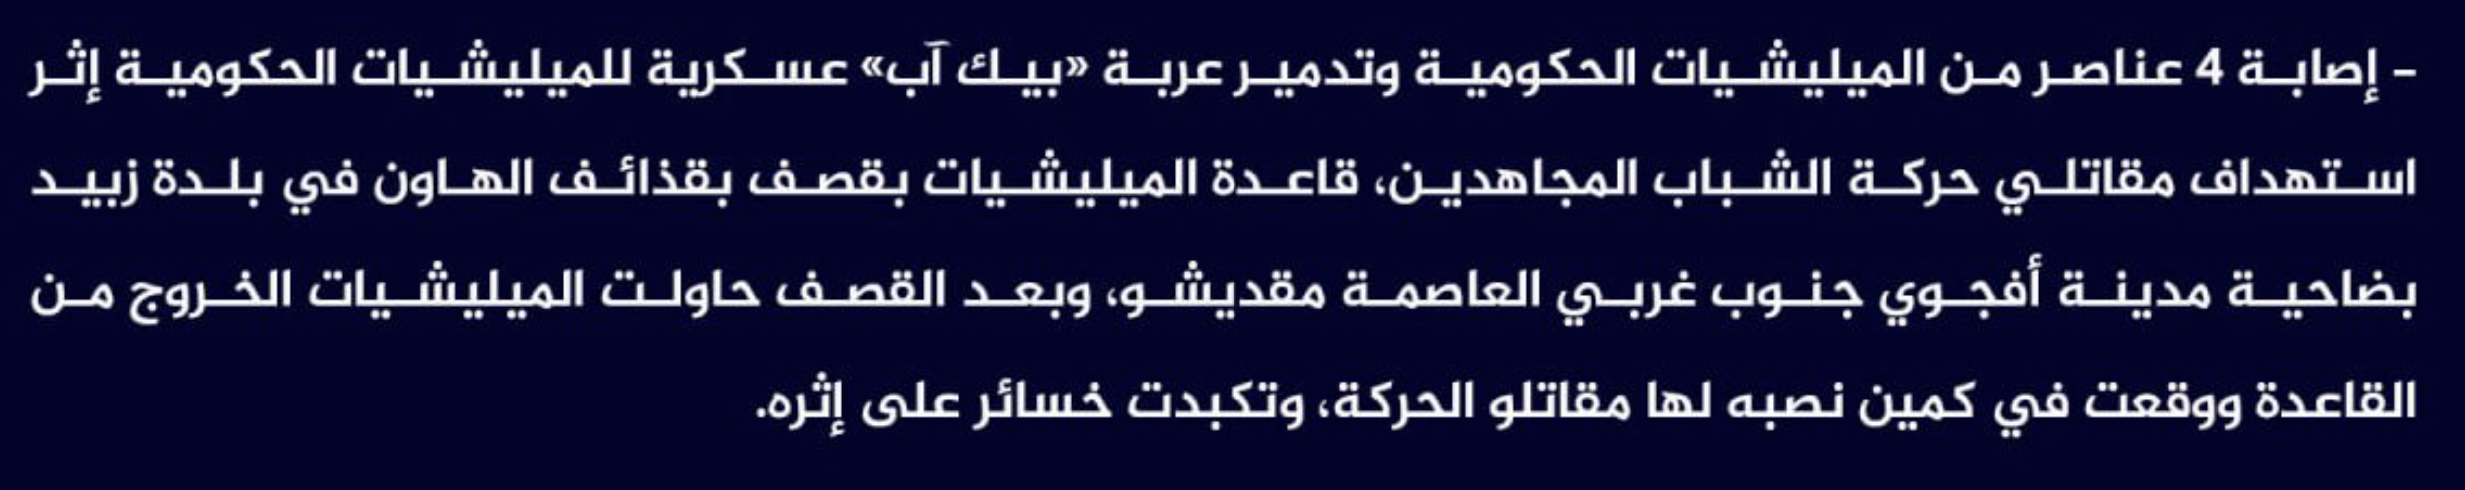 (Claim) al-Shabaab Injured Four Somalian Forces and Destroyed a "Pick up" Military Vehicle in an Attack on a Military Base With Missiles Followed by an Ambush in Zabid Town, Afgoyee City, Southwestern Mogadishu, Somalia - 27 February 2023